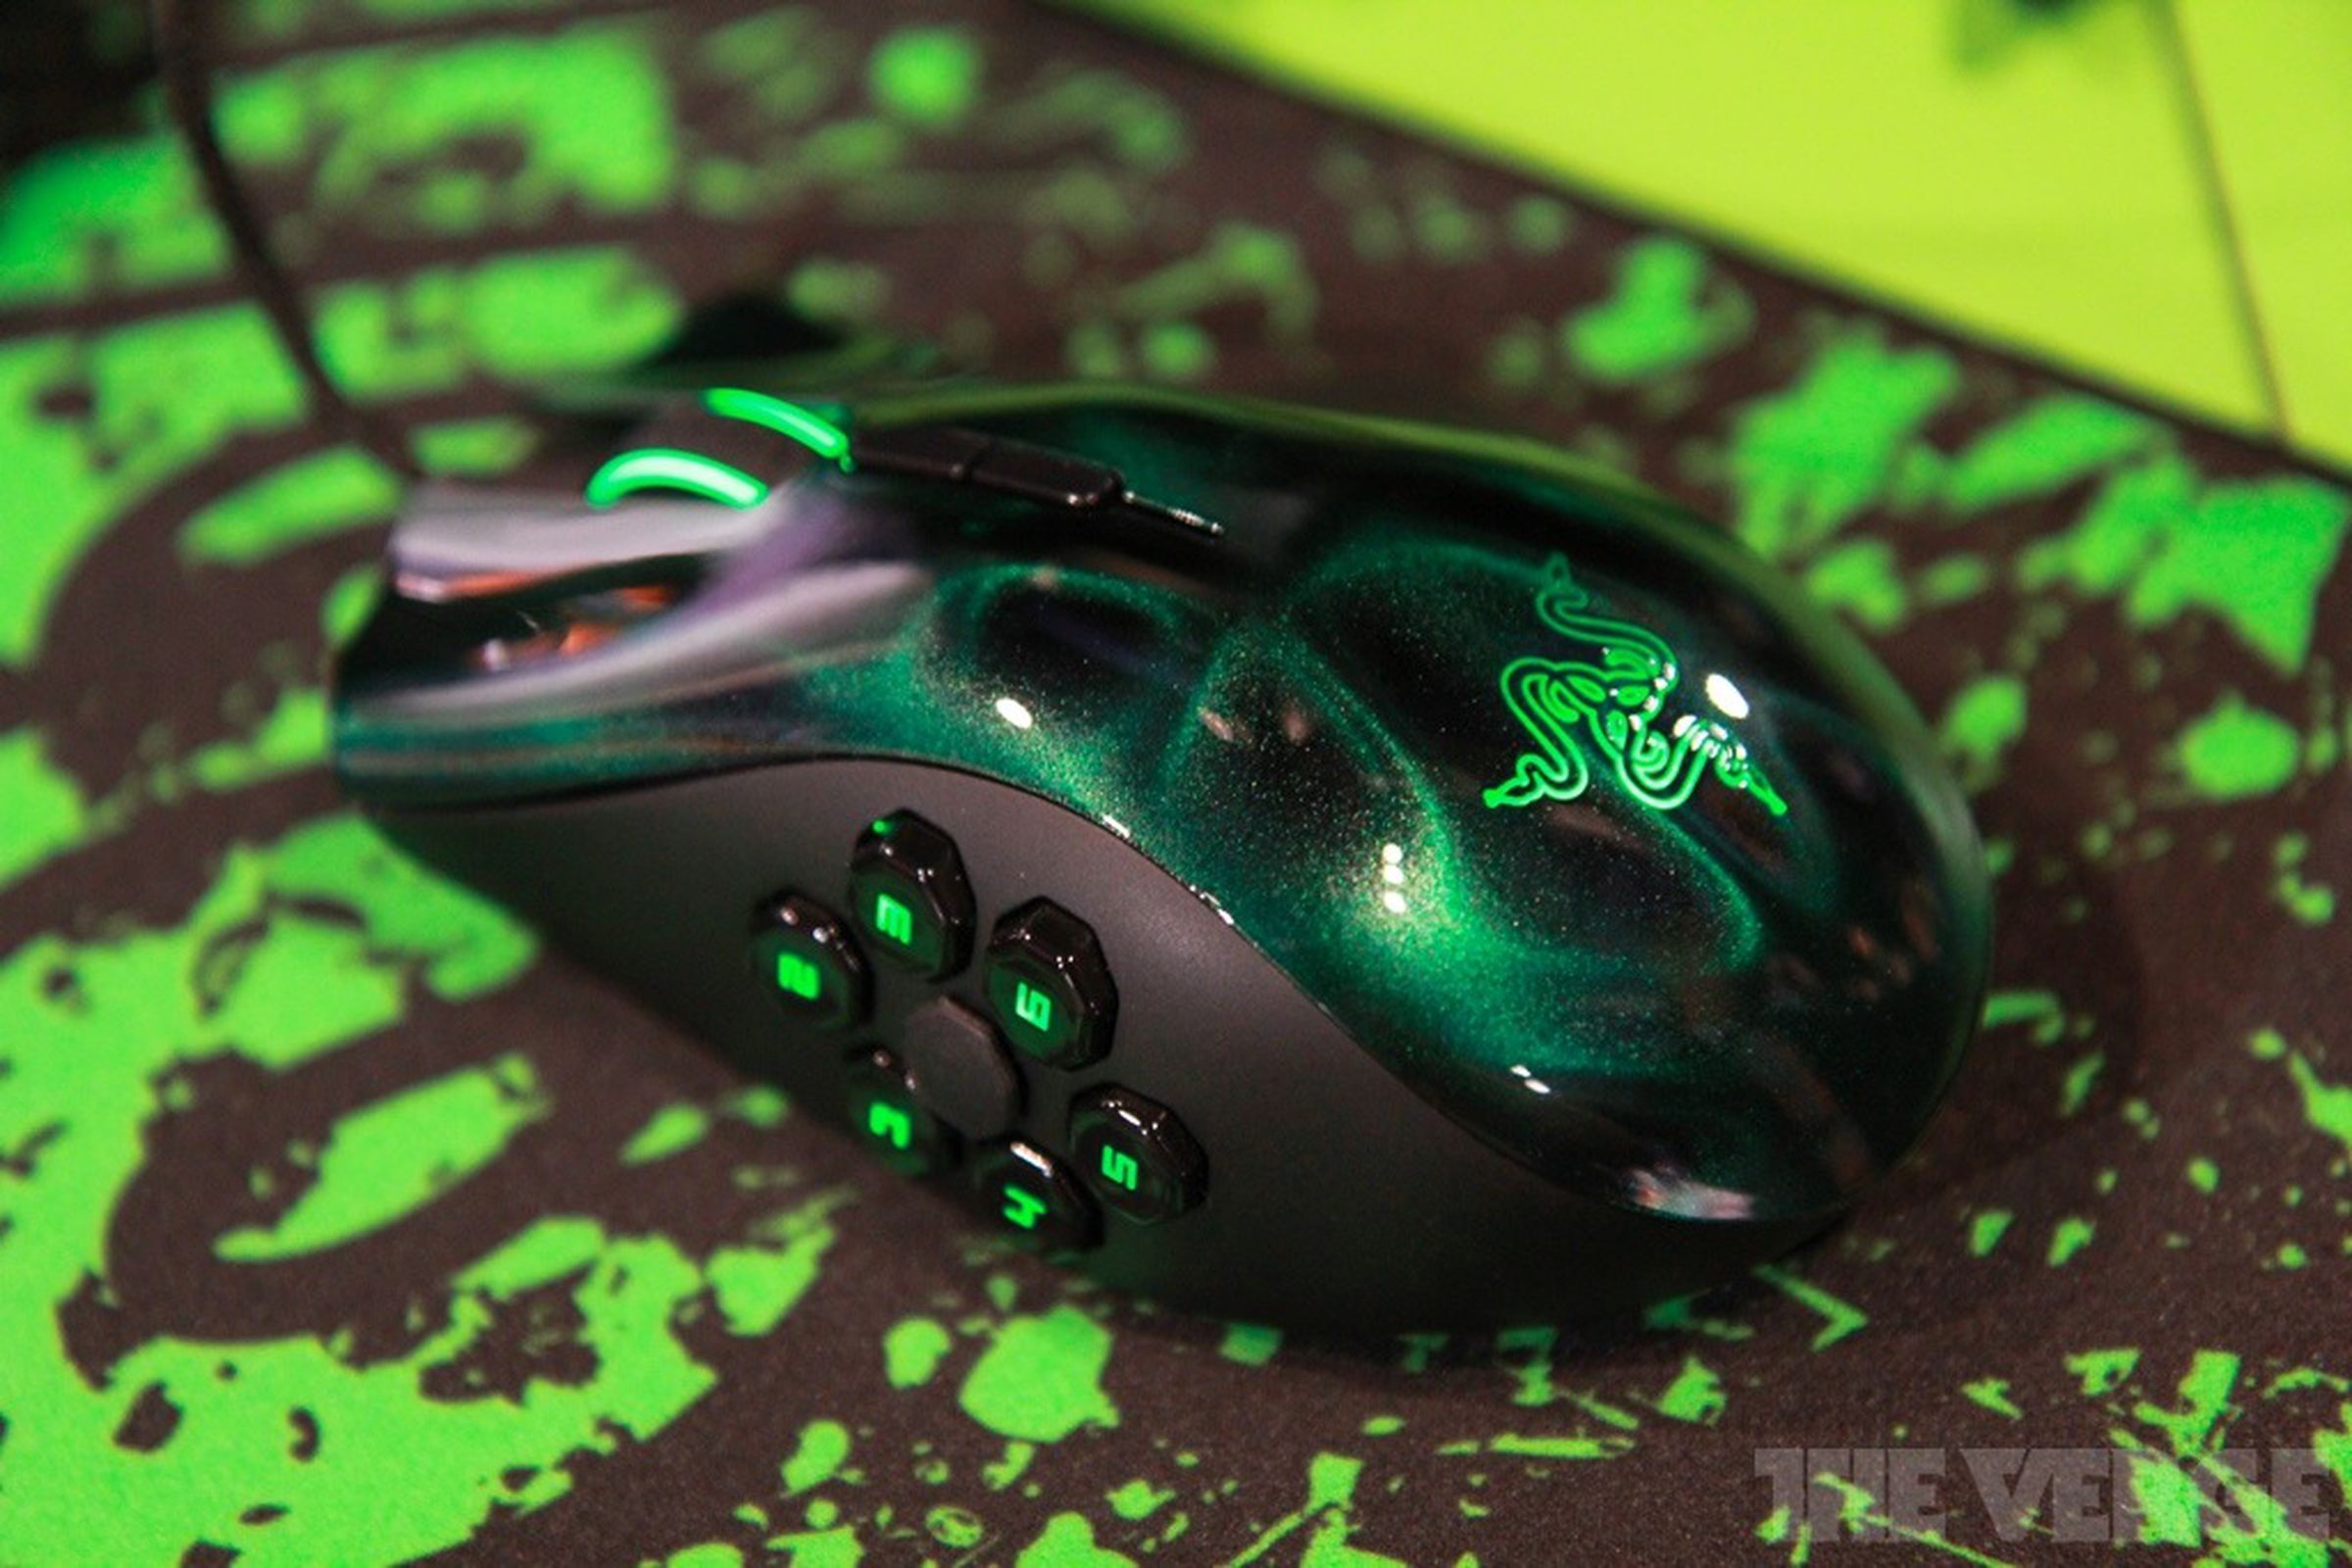 Gallery Photo: Razer Naga Hex gaming mouse hands-on pictures